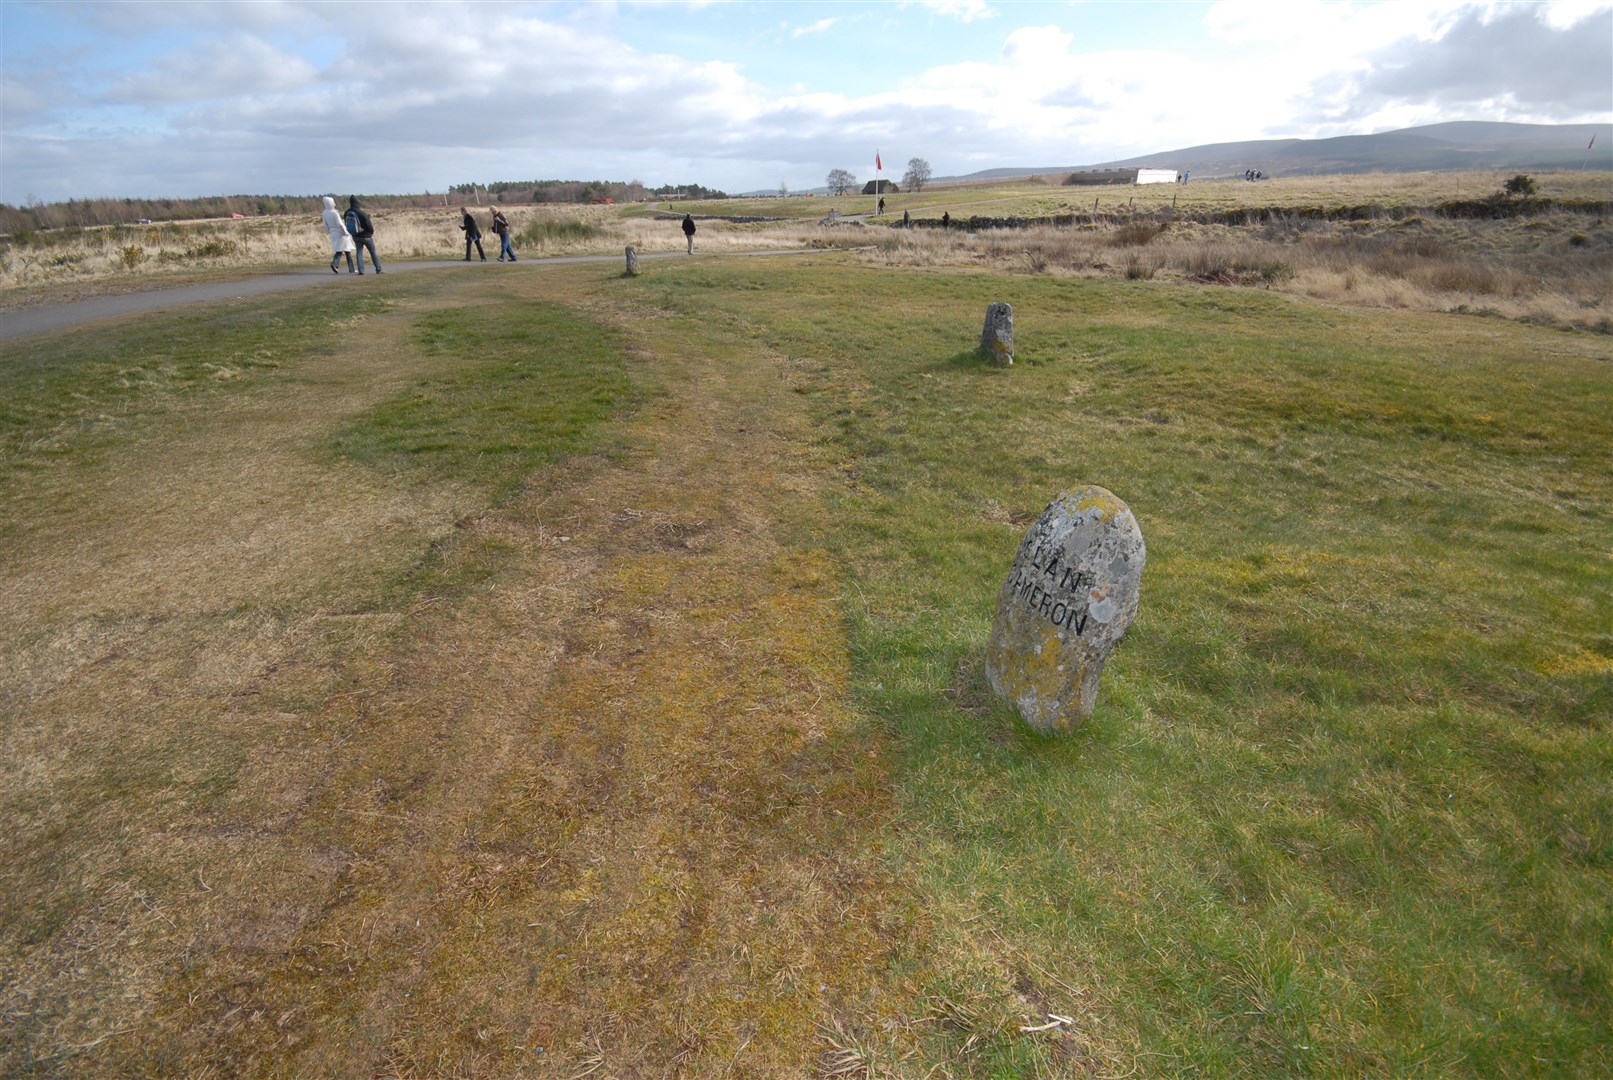 Plans for a holiday development near Culloden Battlefield have sparked objections.